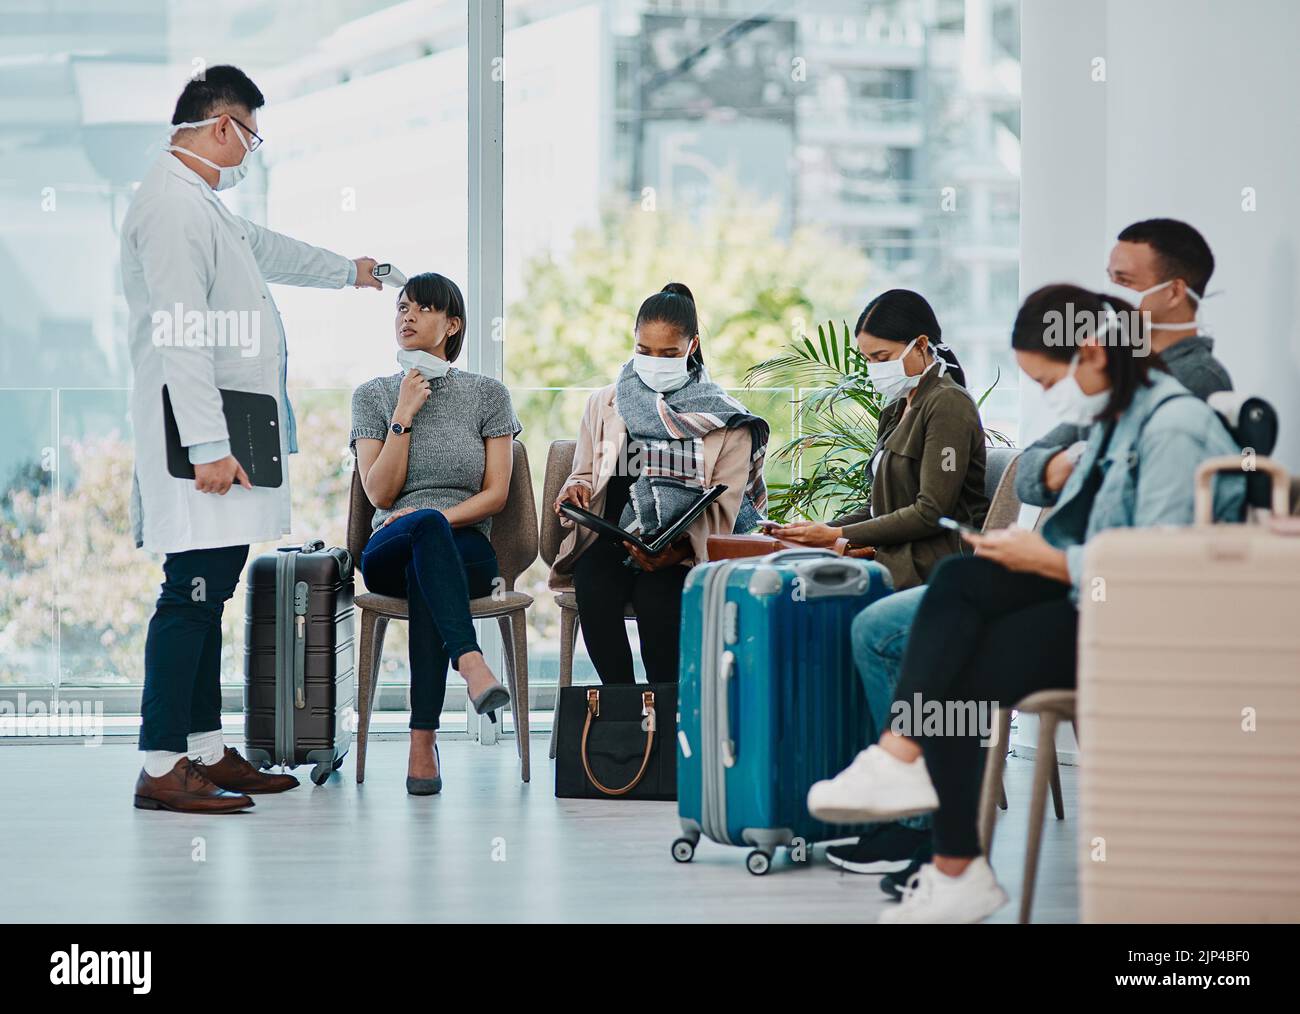 Covid doctor taking temperature of travel passengers in covid masks during tourism in an airport with an infrared thermometer. Medical professional Stock Photo